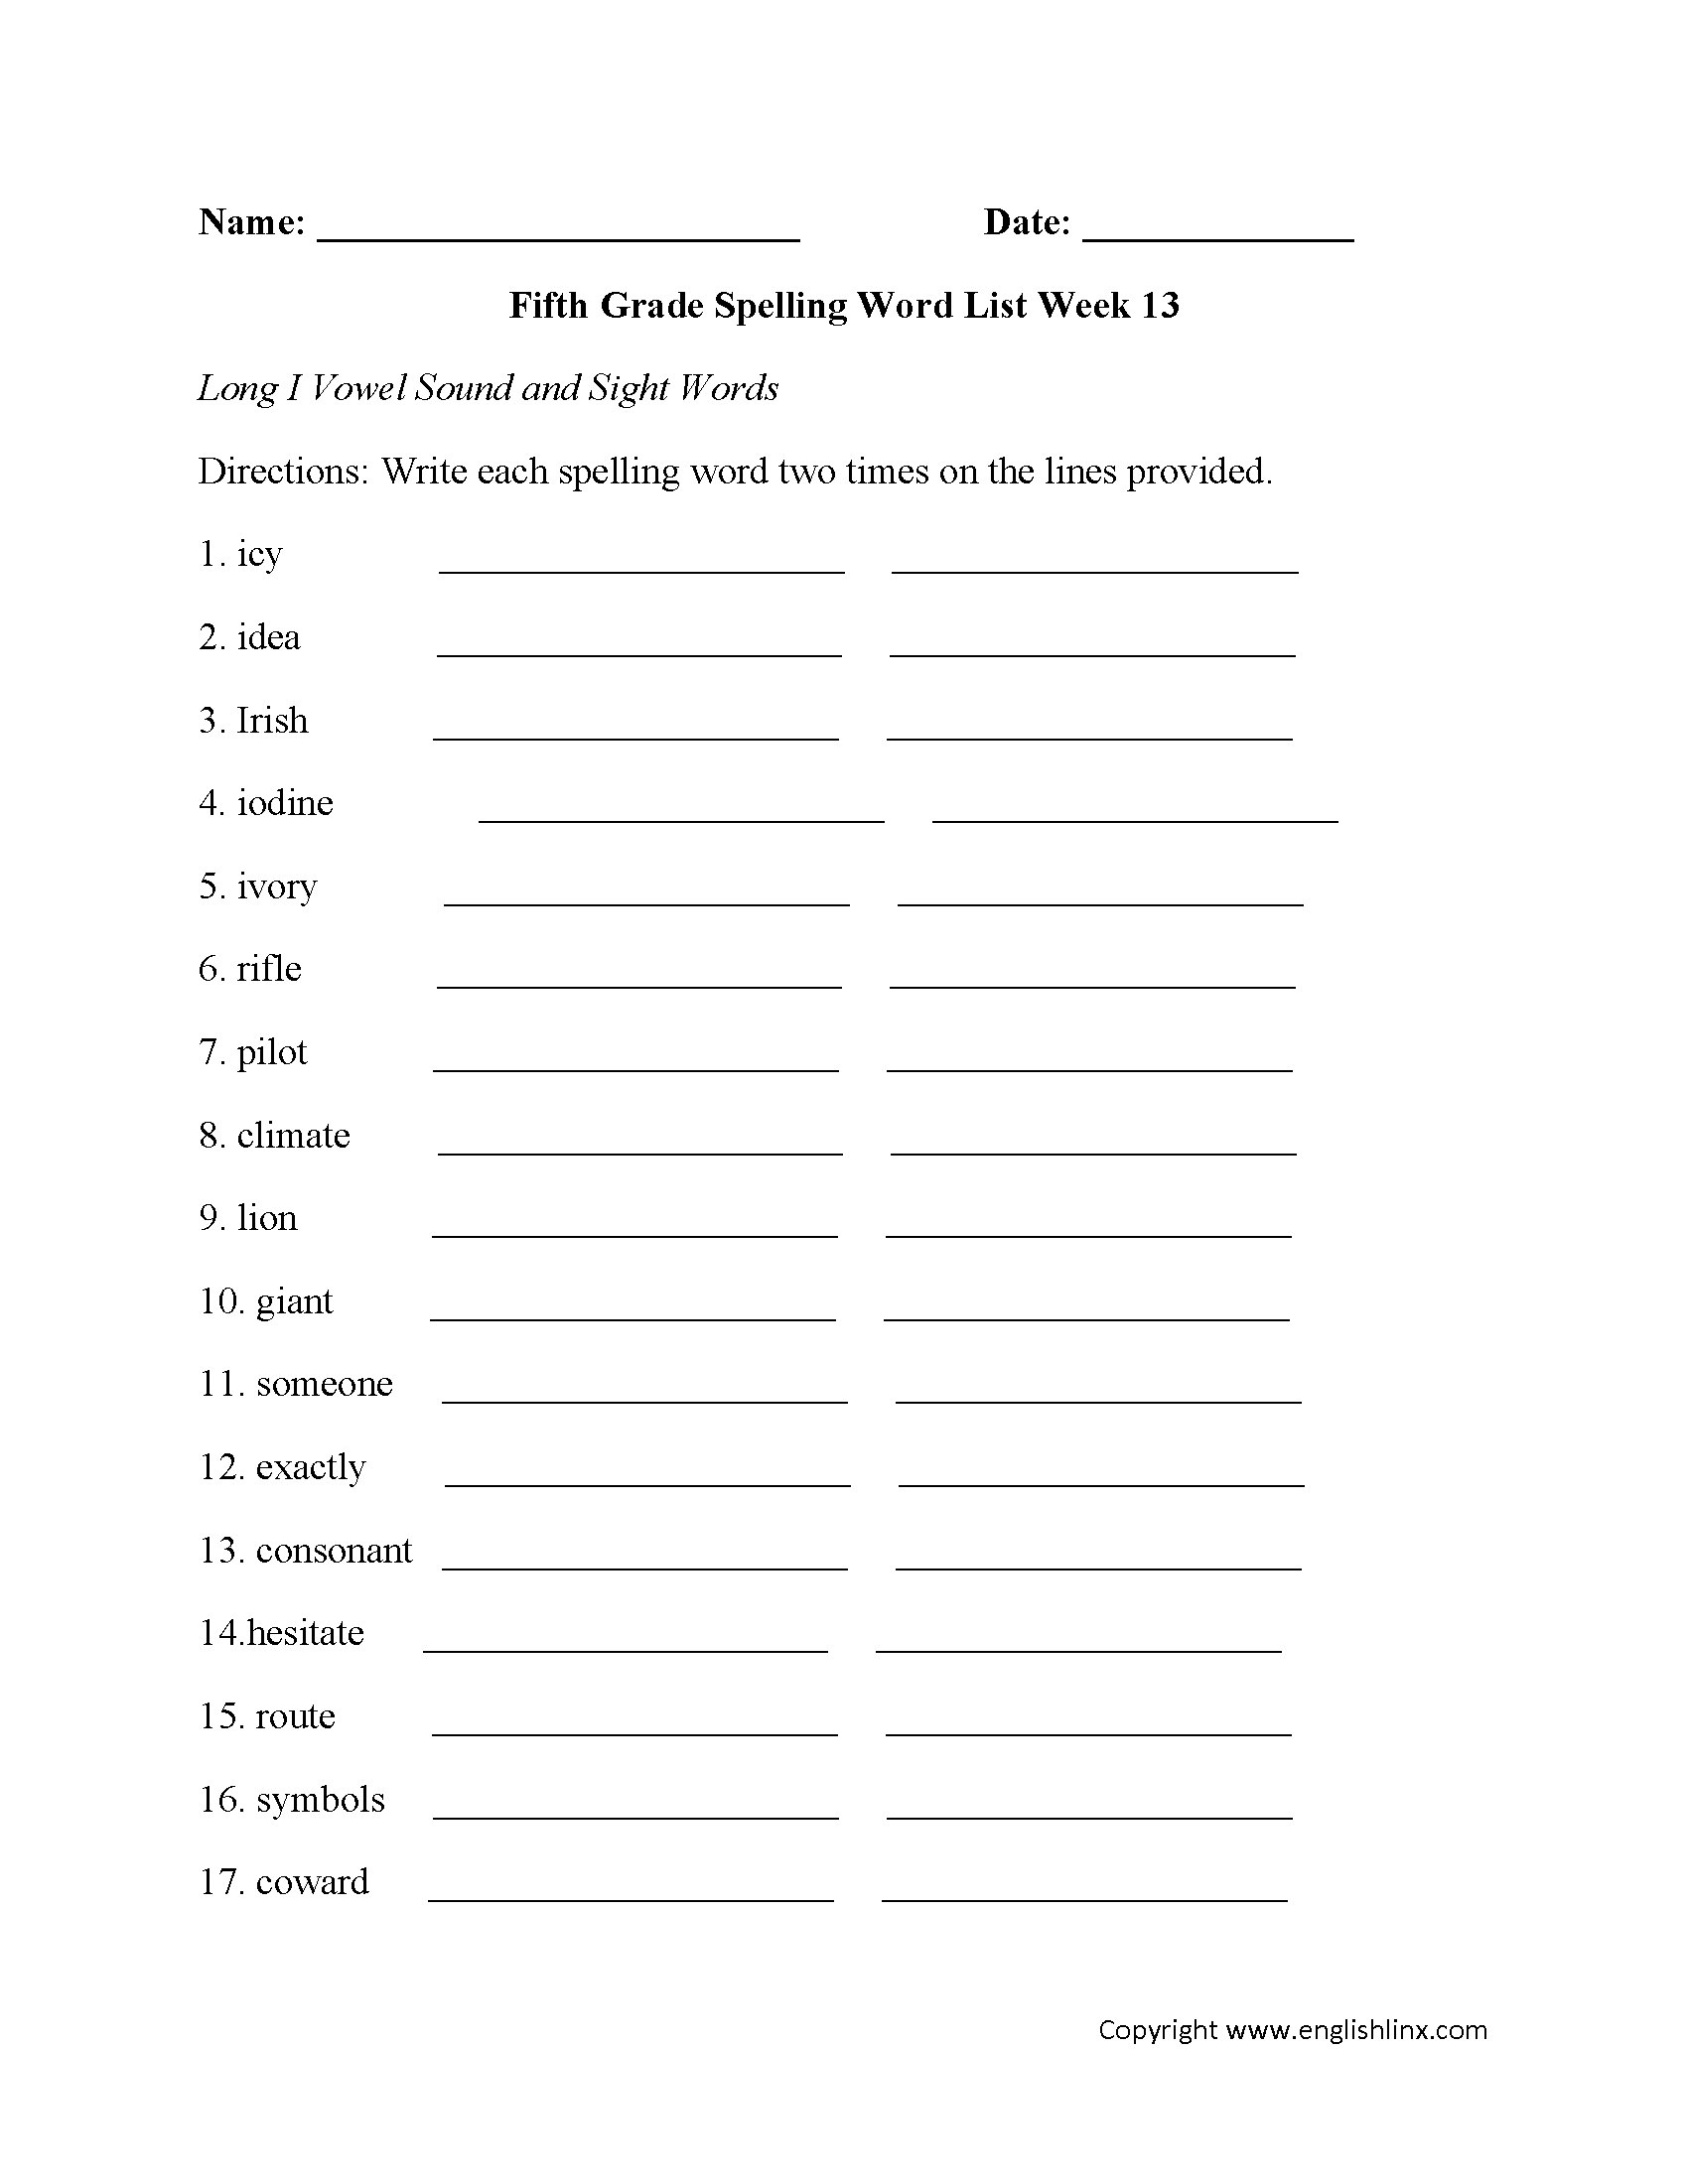 Week 13 Long I Vowel and Sight Words Fifth Grade Spelling Words Worksheets